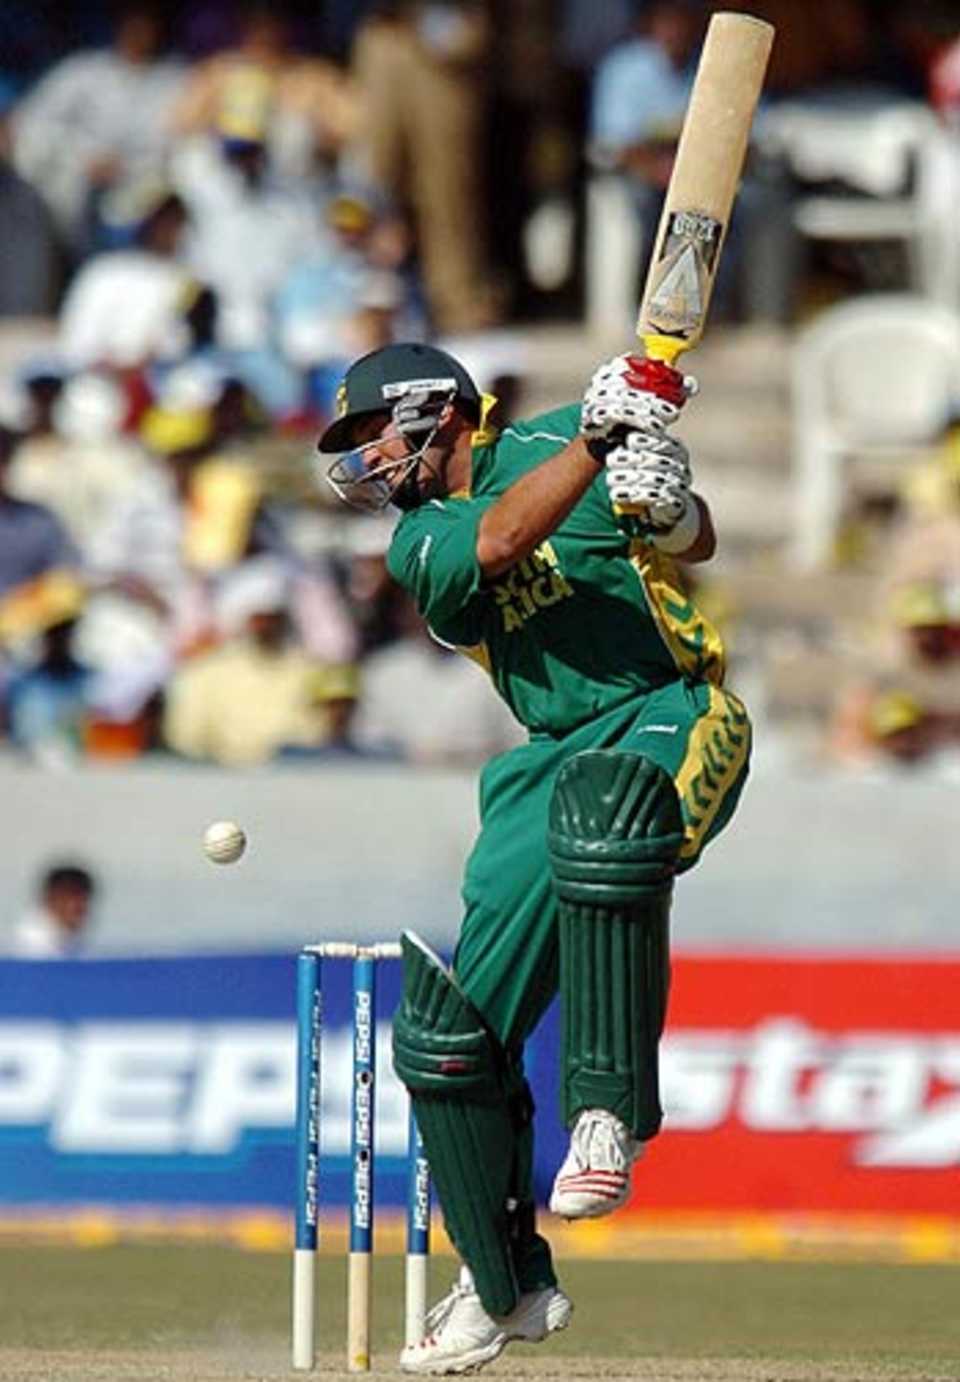 Jacques Kallis' unbeaten 68 took South Africa to a 5-wicket win